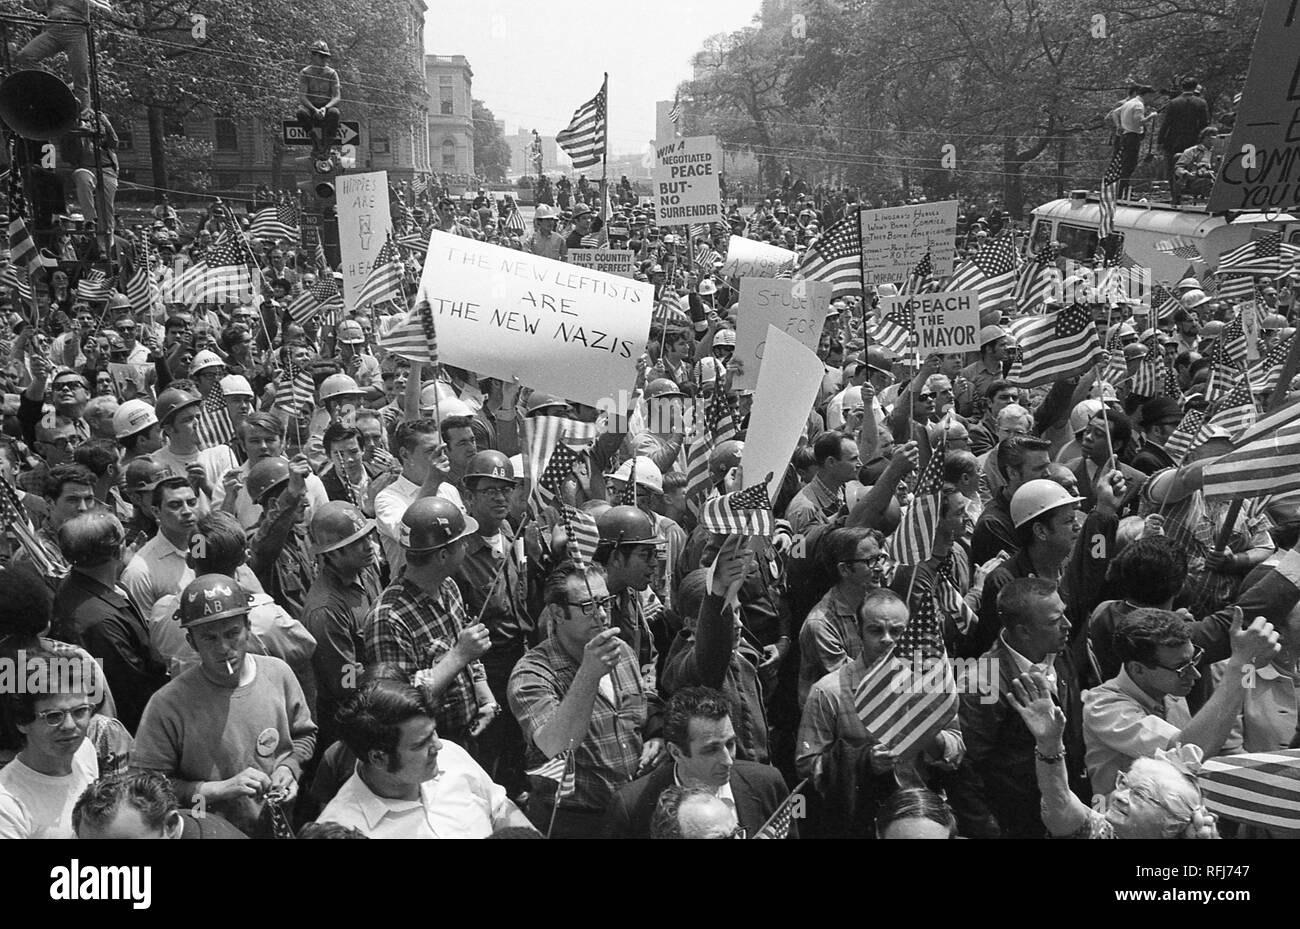 Demonstrators march and hold banners while participating in protests related to the anti-Vietnam War Hard Hat Riot, New York City, New York, May 1970. () Stock Photo